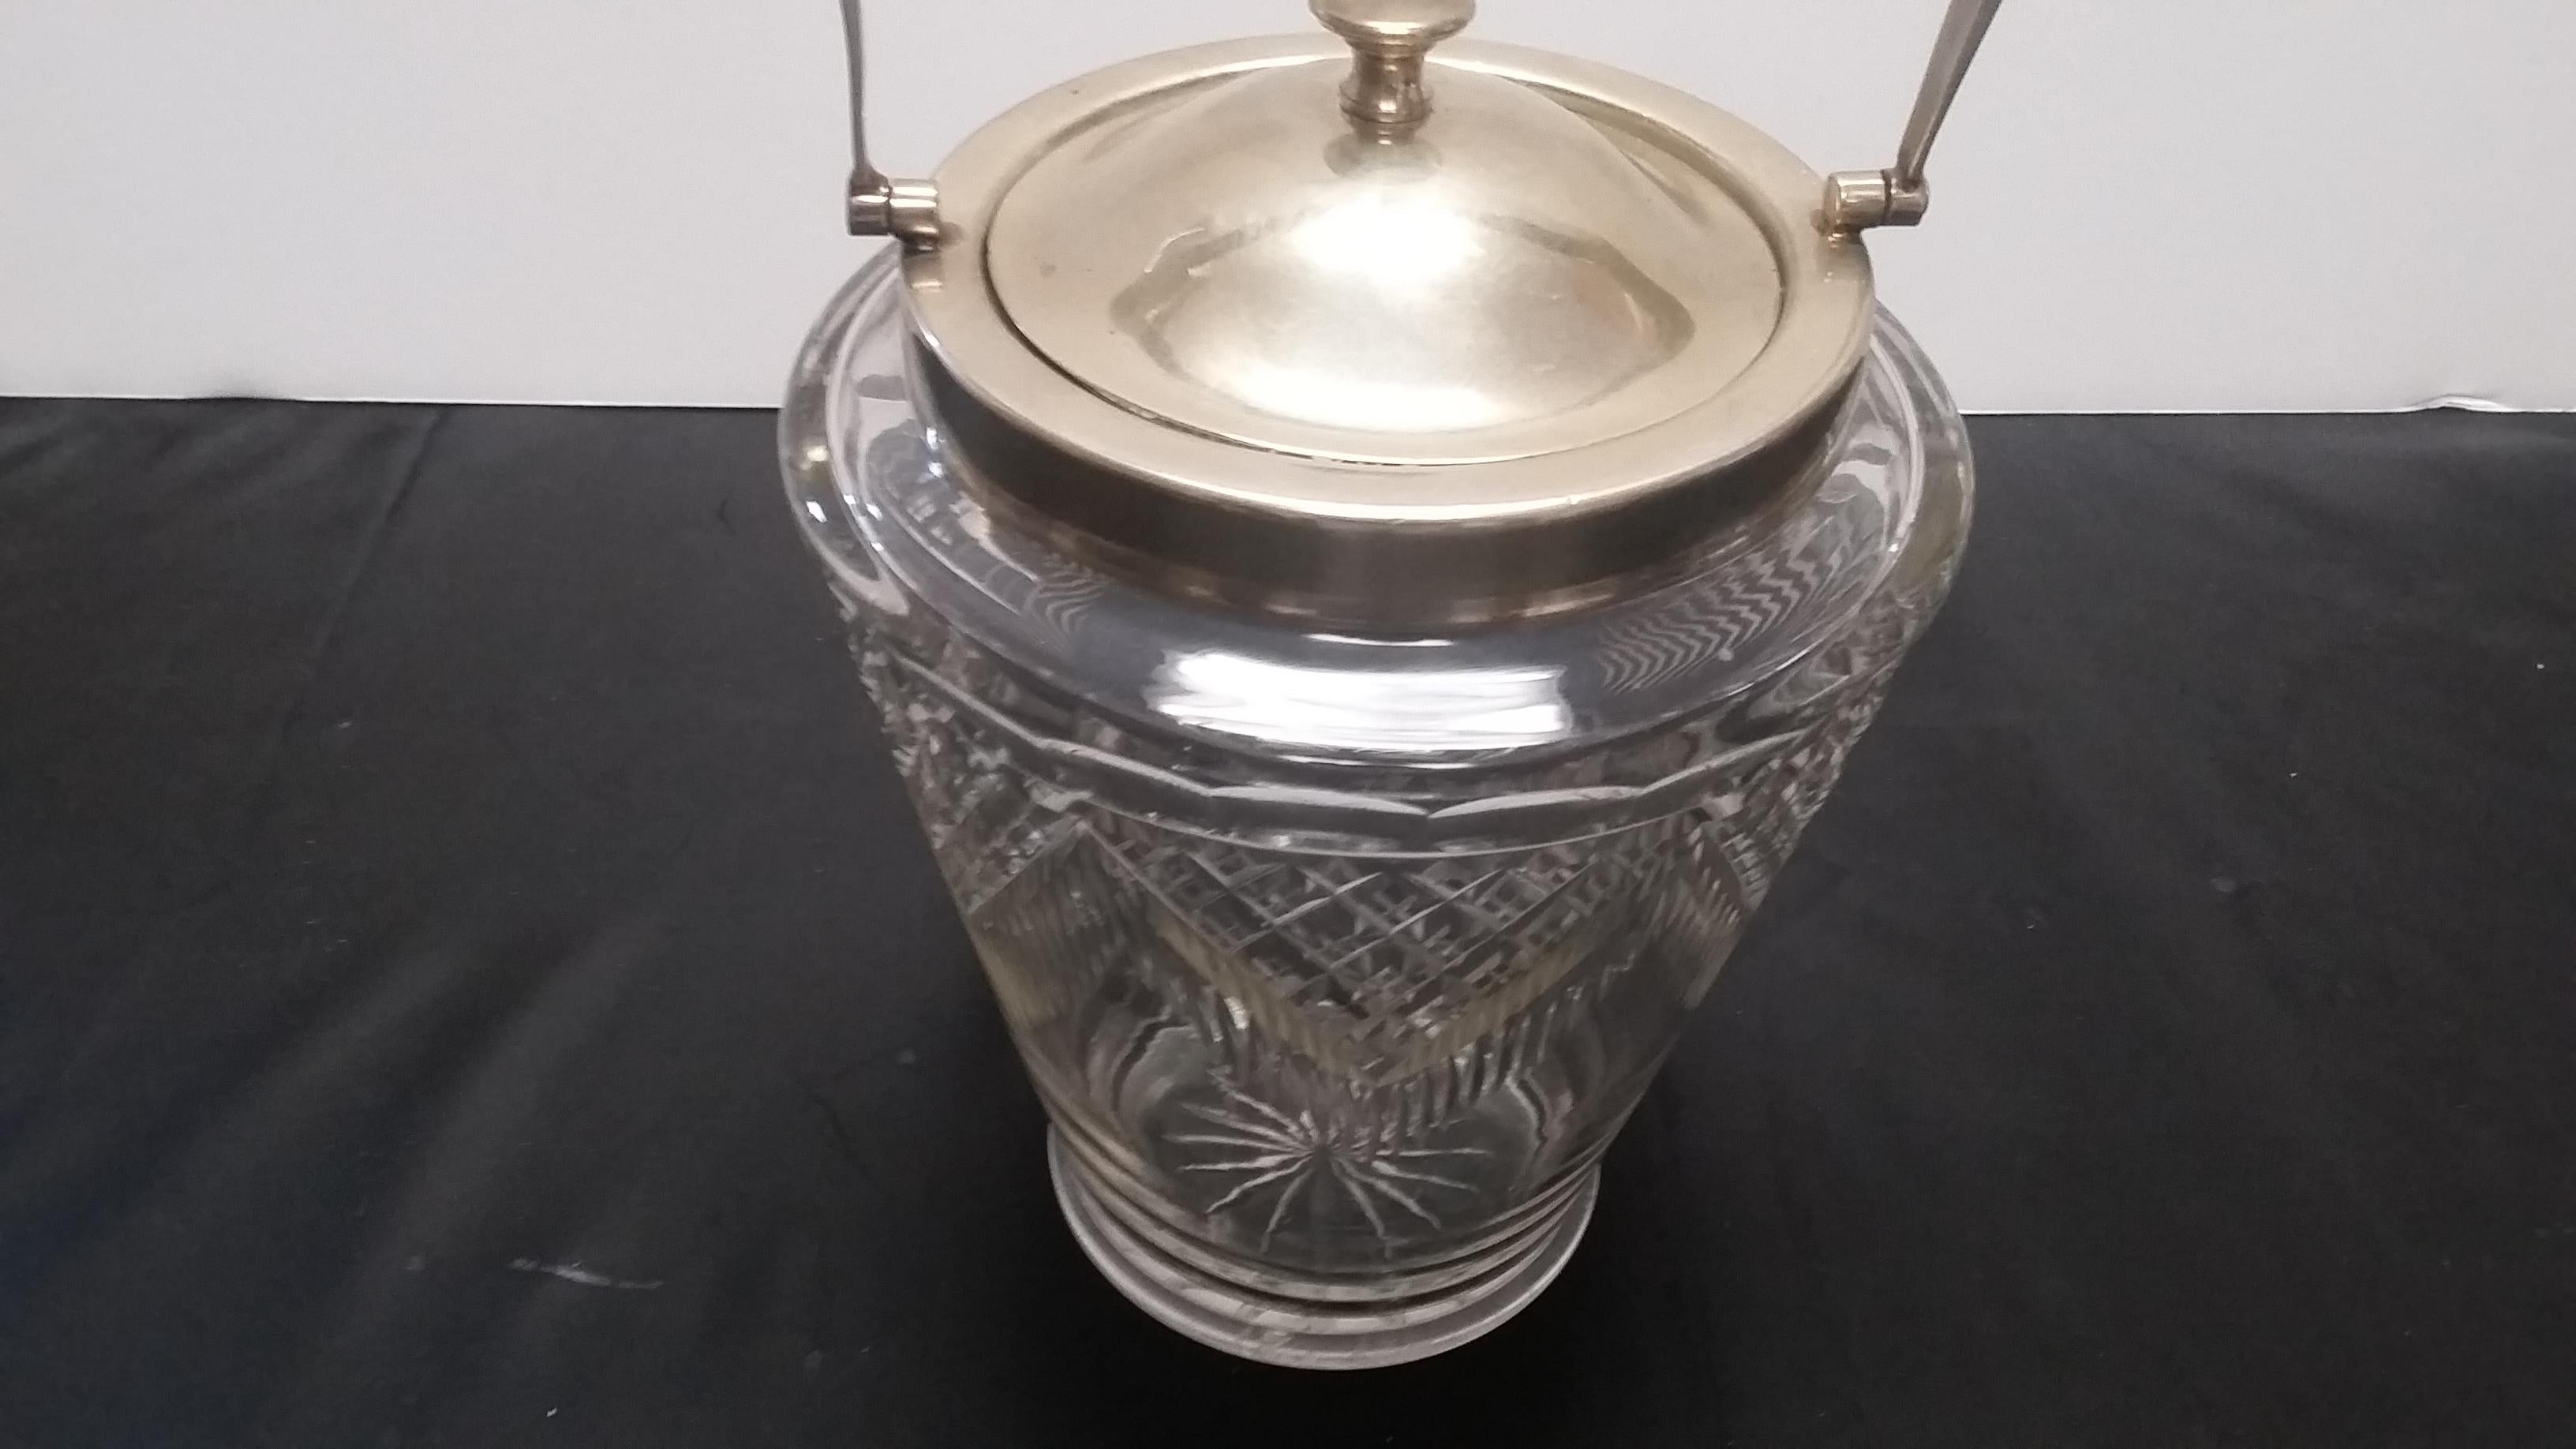 Beautiful cut crystal biscuit jar from England. Late 19th century (circa 1870) with silver plated top and rim. Diamond pattern to the crystal.